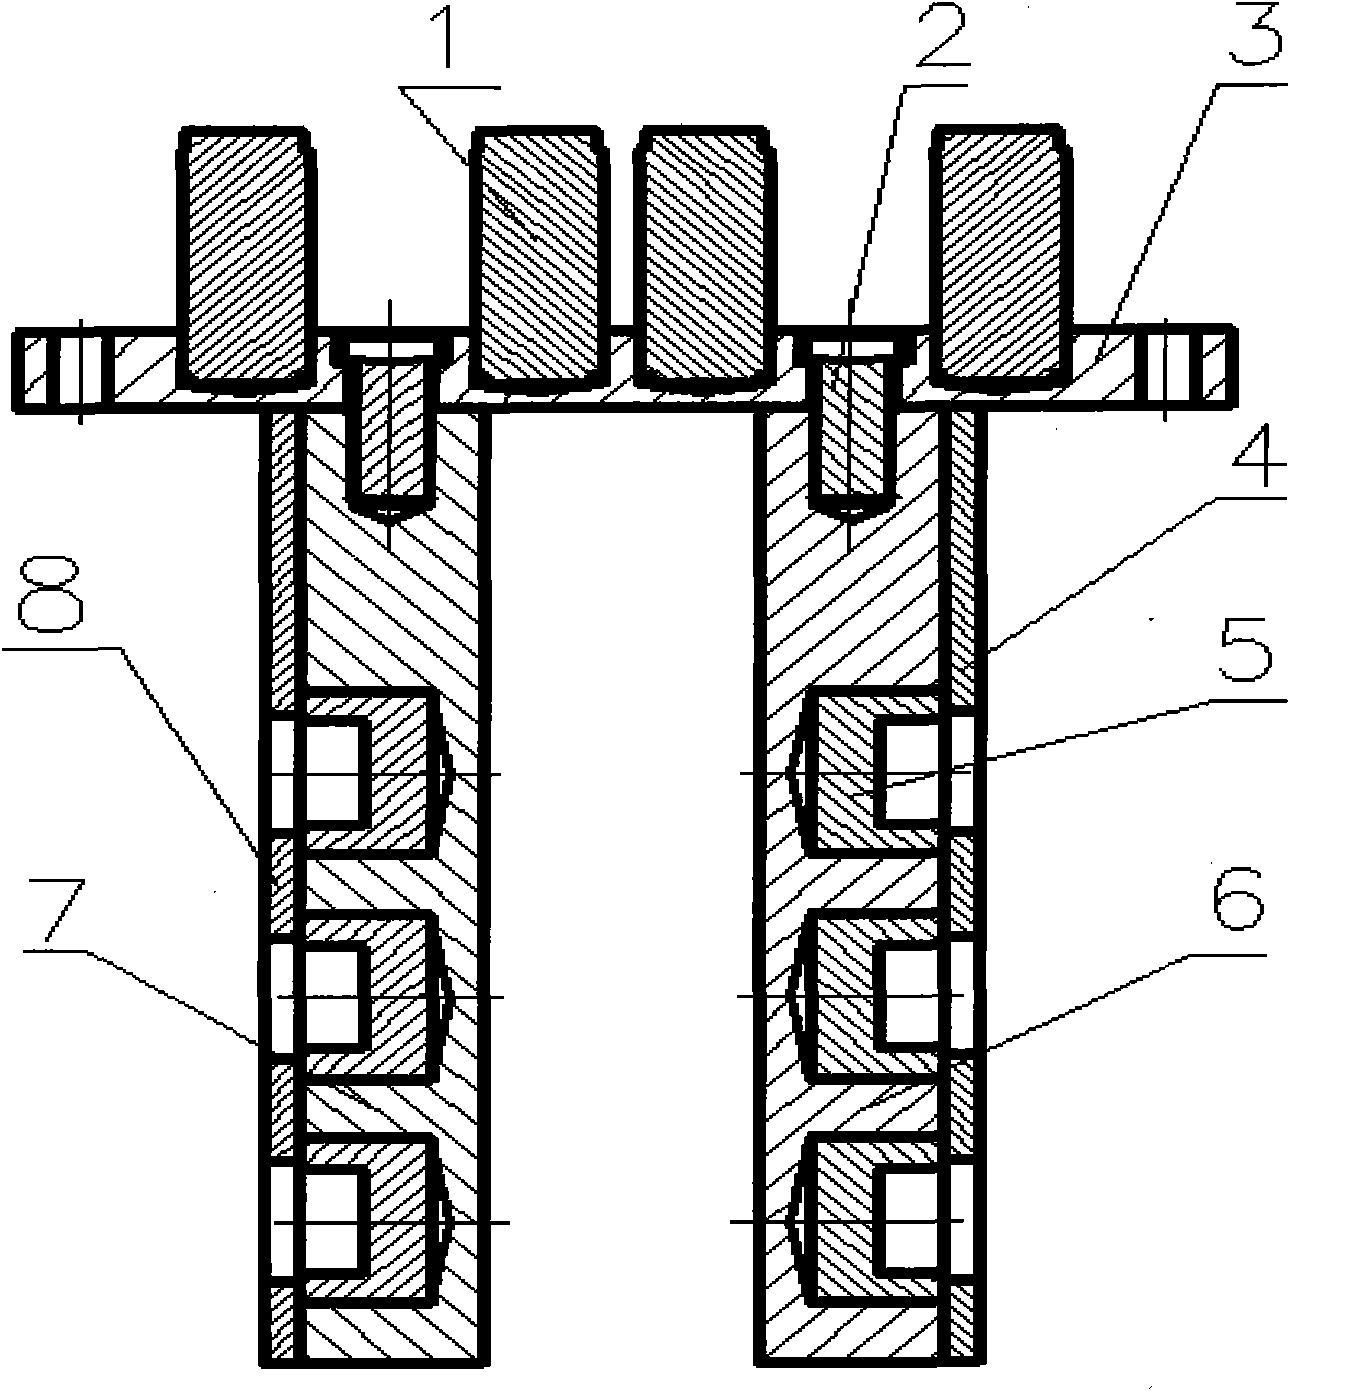 Device and method for implementing local electroplating of parts